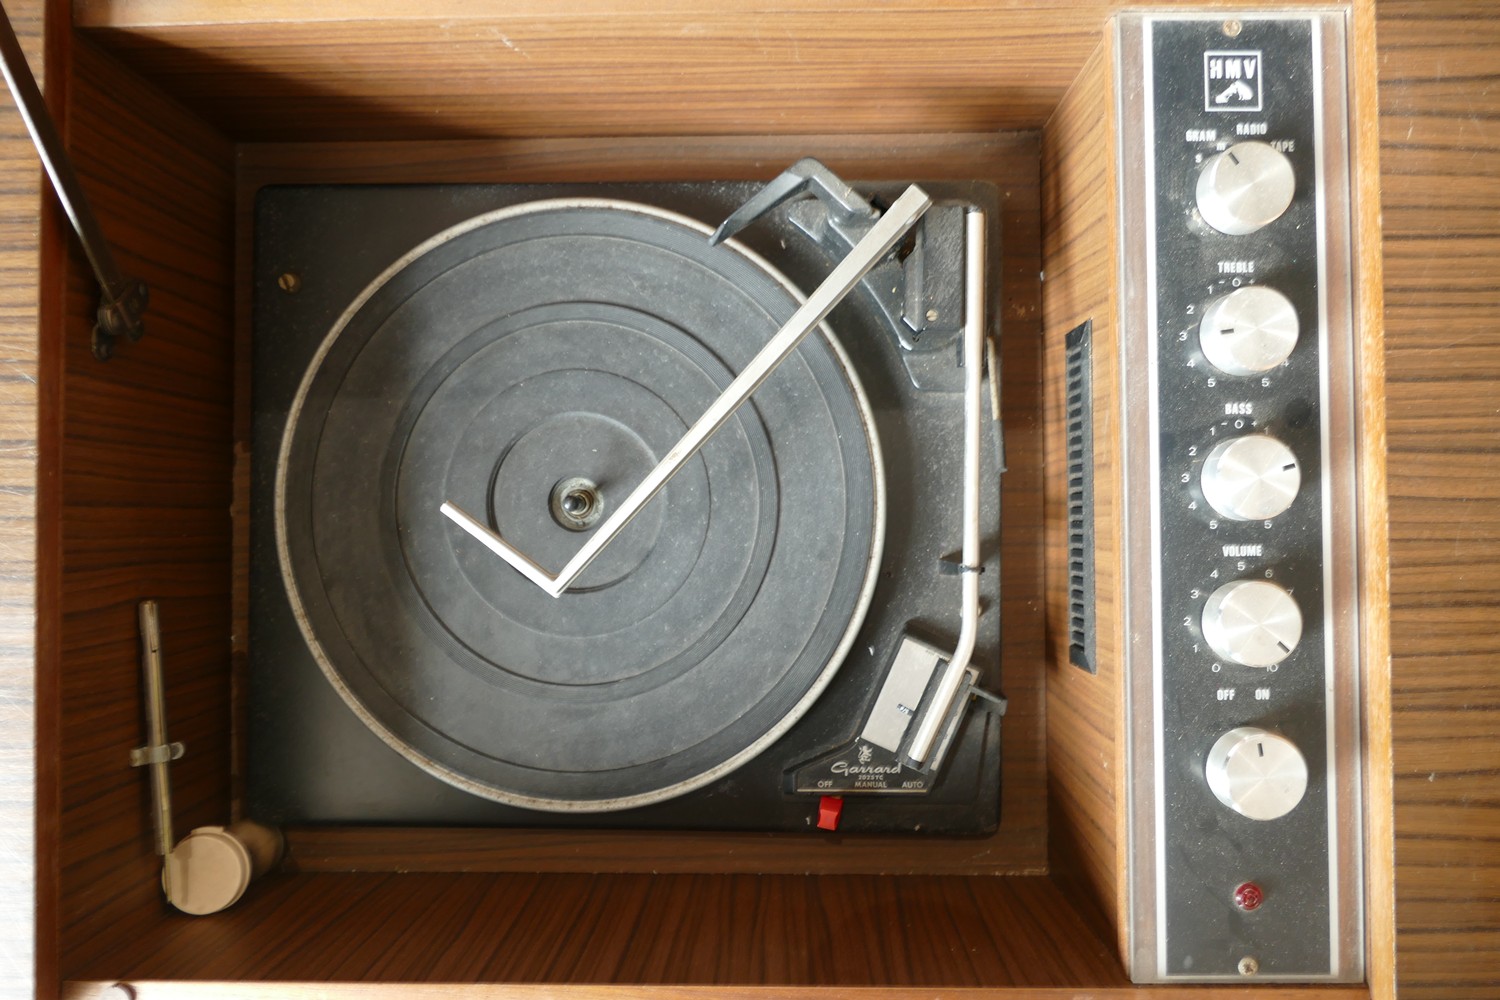 A HMV with integrated Garrard deck, model number 2025TC, cabinet record player, 50cm tall, 68cm